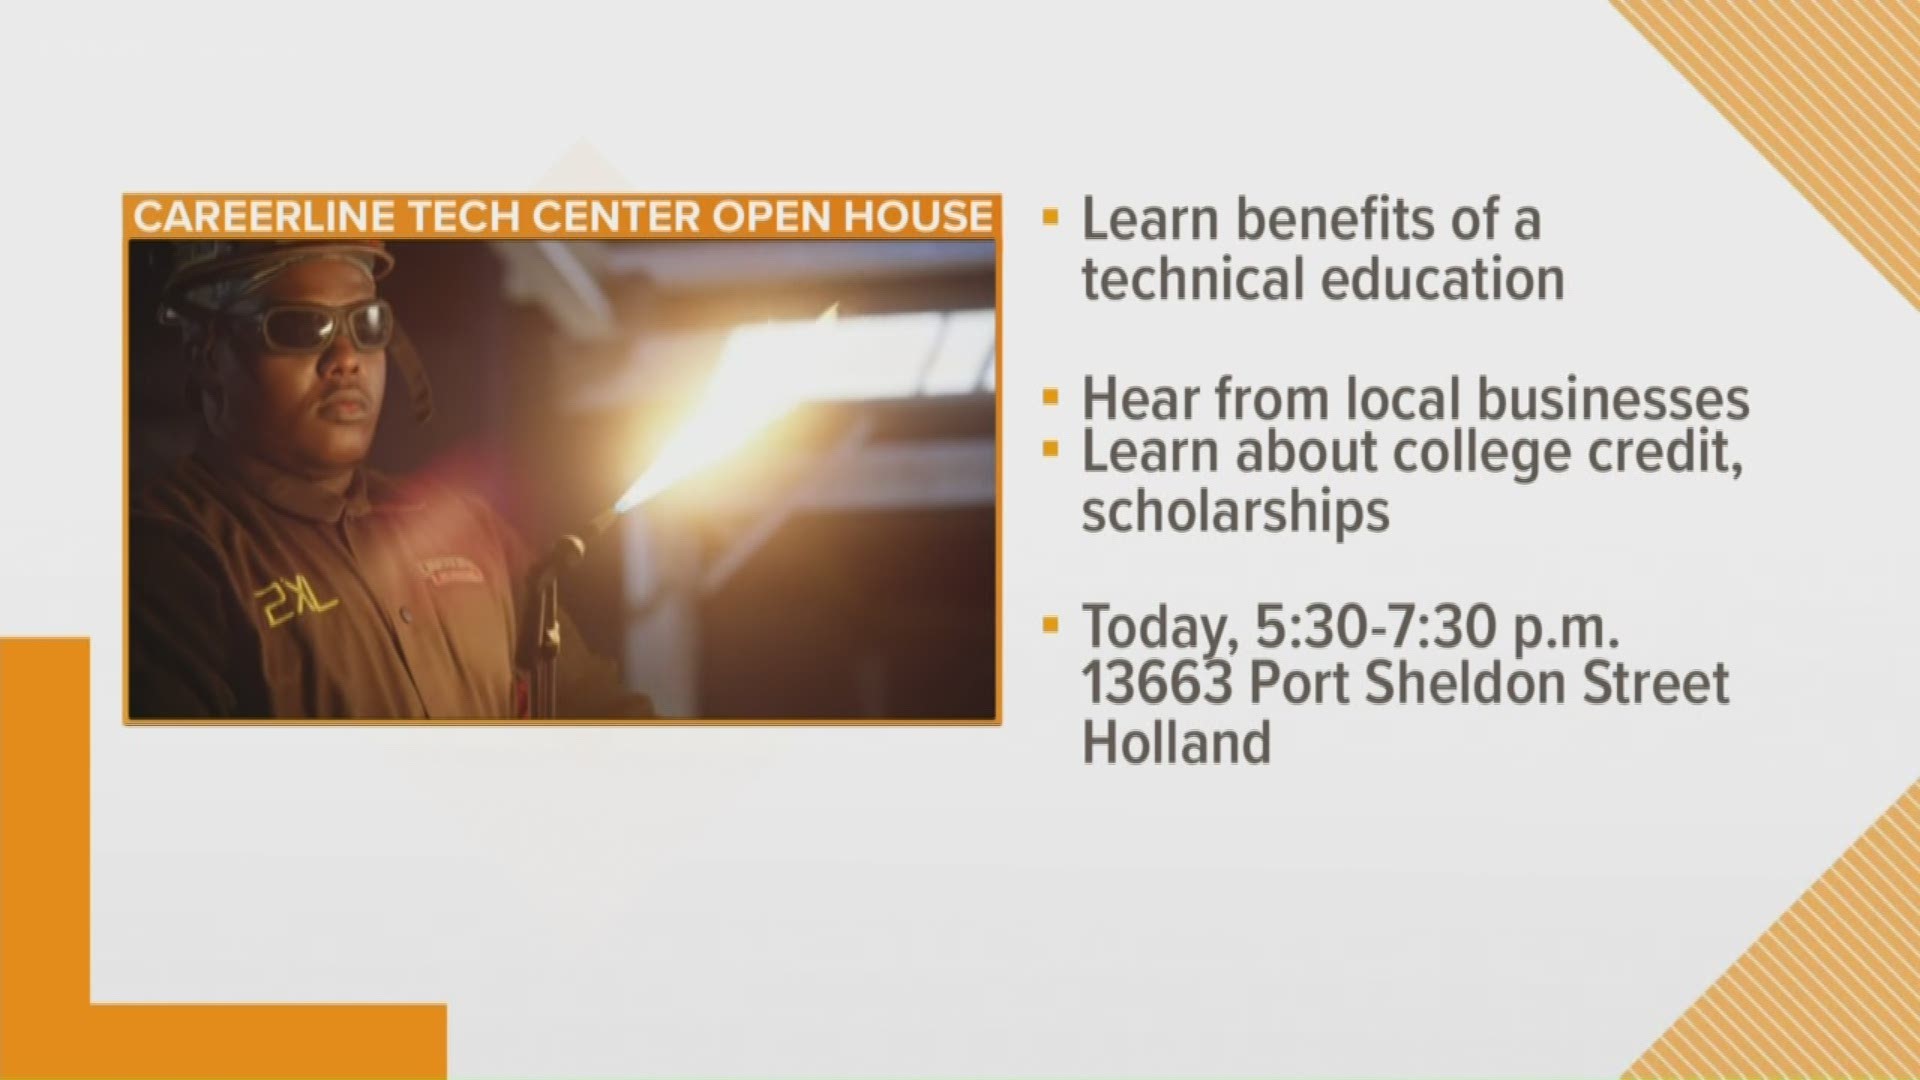 Teens on the lakeshore can learn more about the benefits of getting a technical education at Careerline Tech Center.